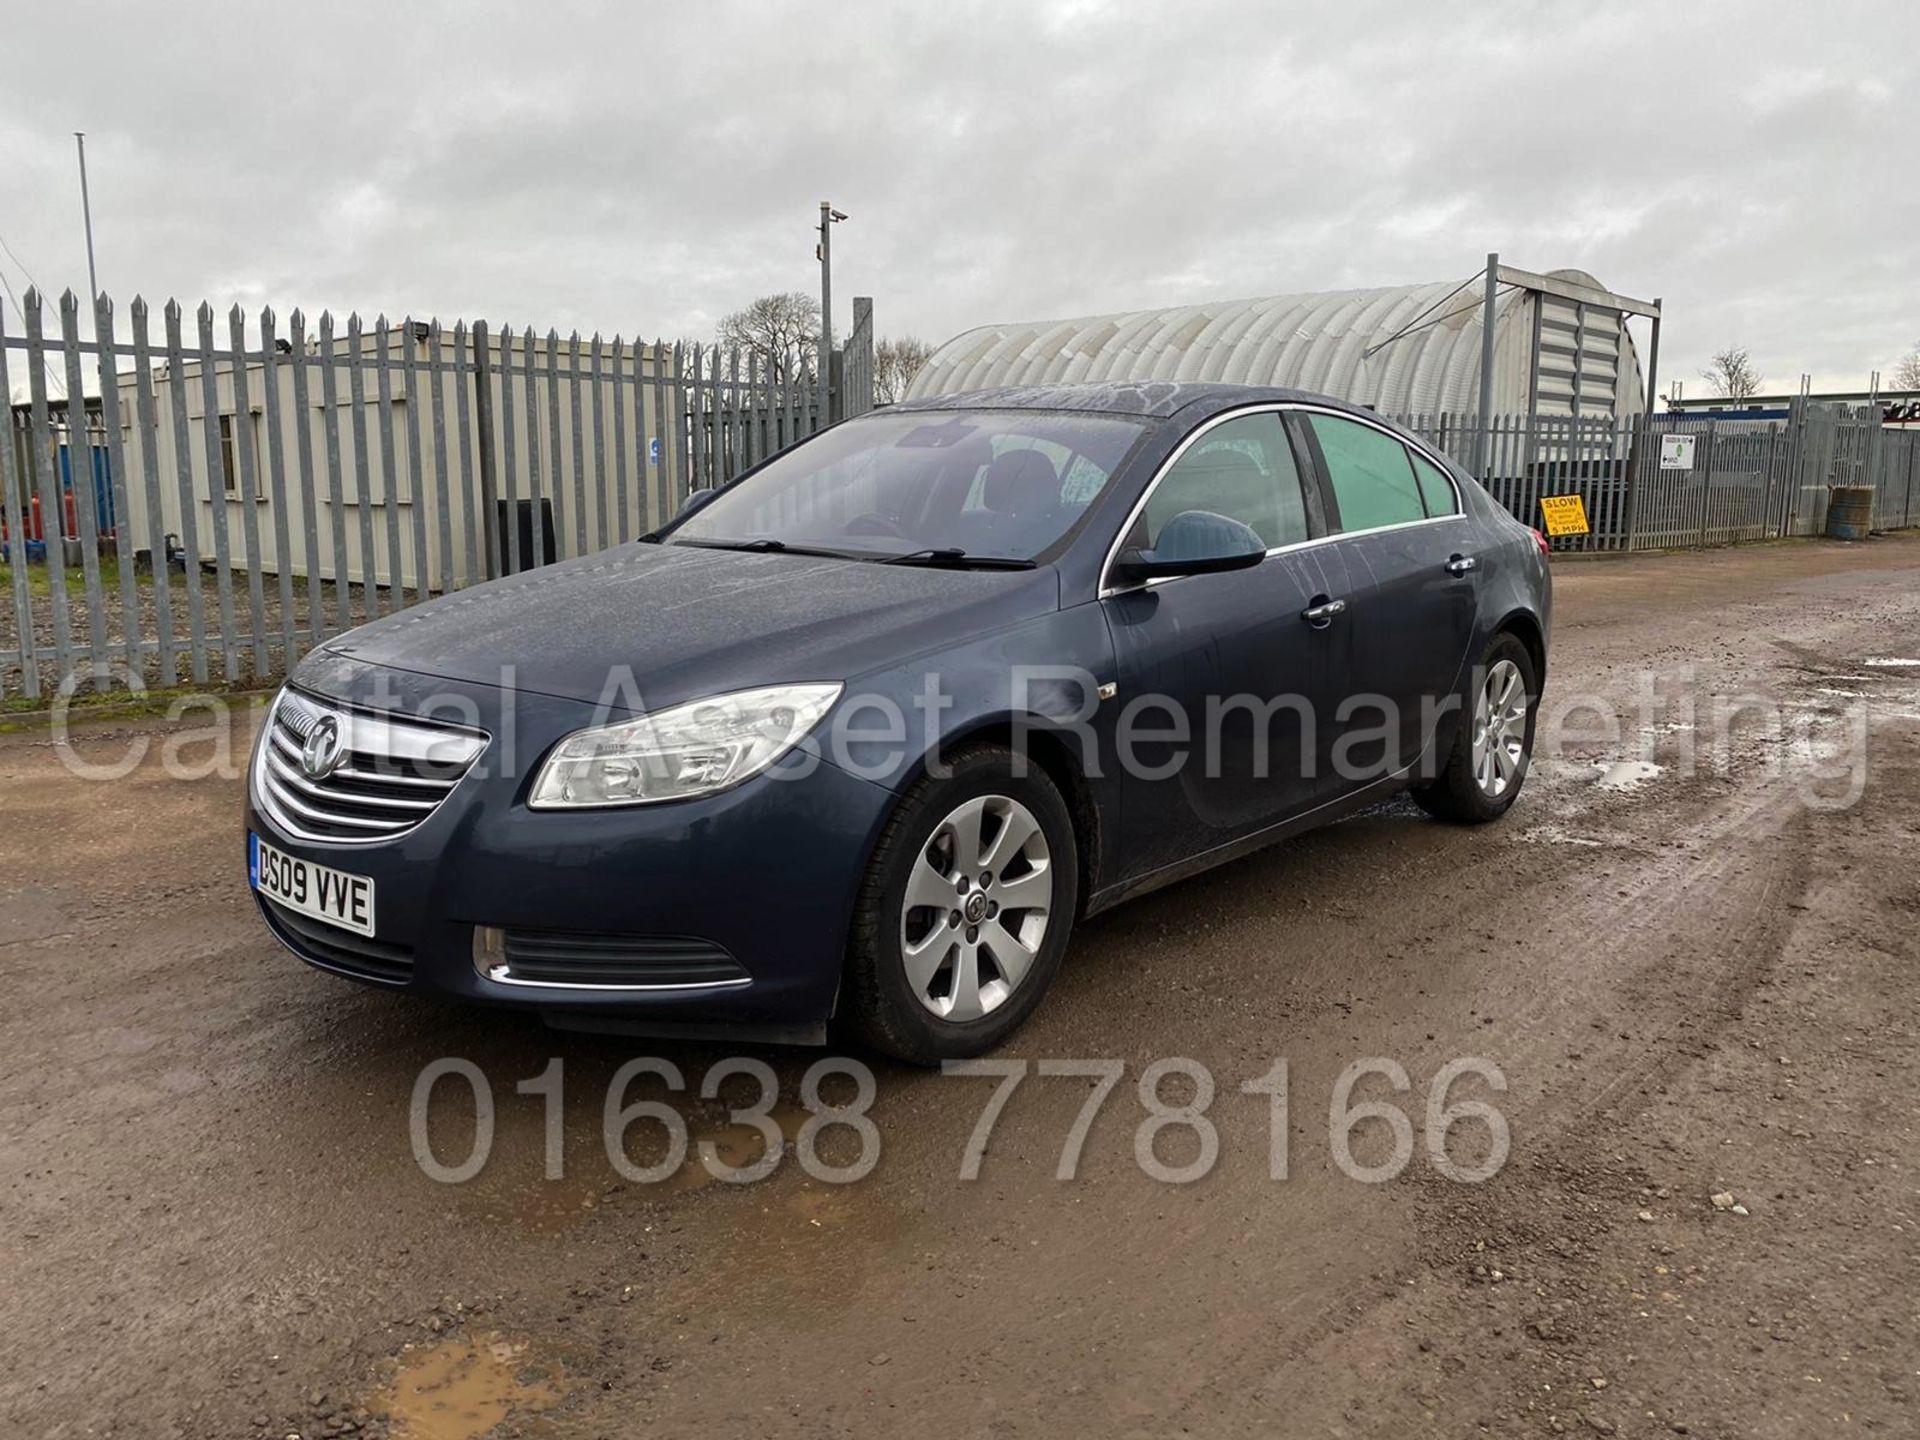 ON SALE VAUXHALL INSIGNIA *SE EDITION* (2009) '1.8 PETROL -6 SPEED' *A/C* LOW MILES ! (NO VAT) - Image 3 of 15